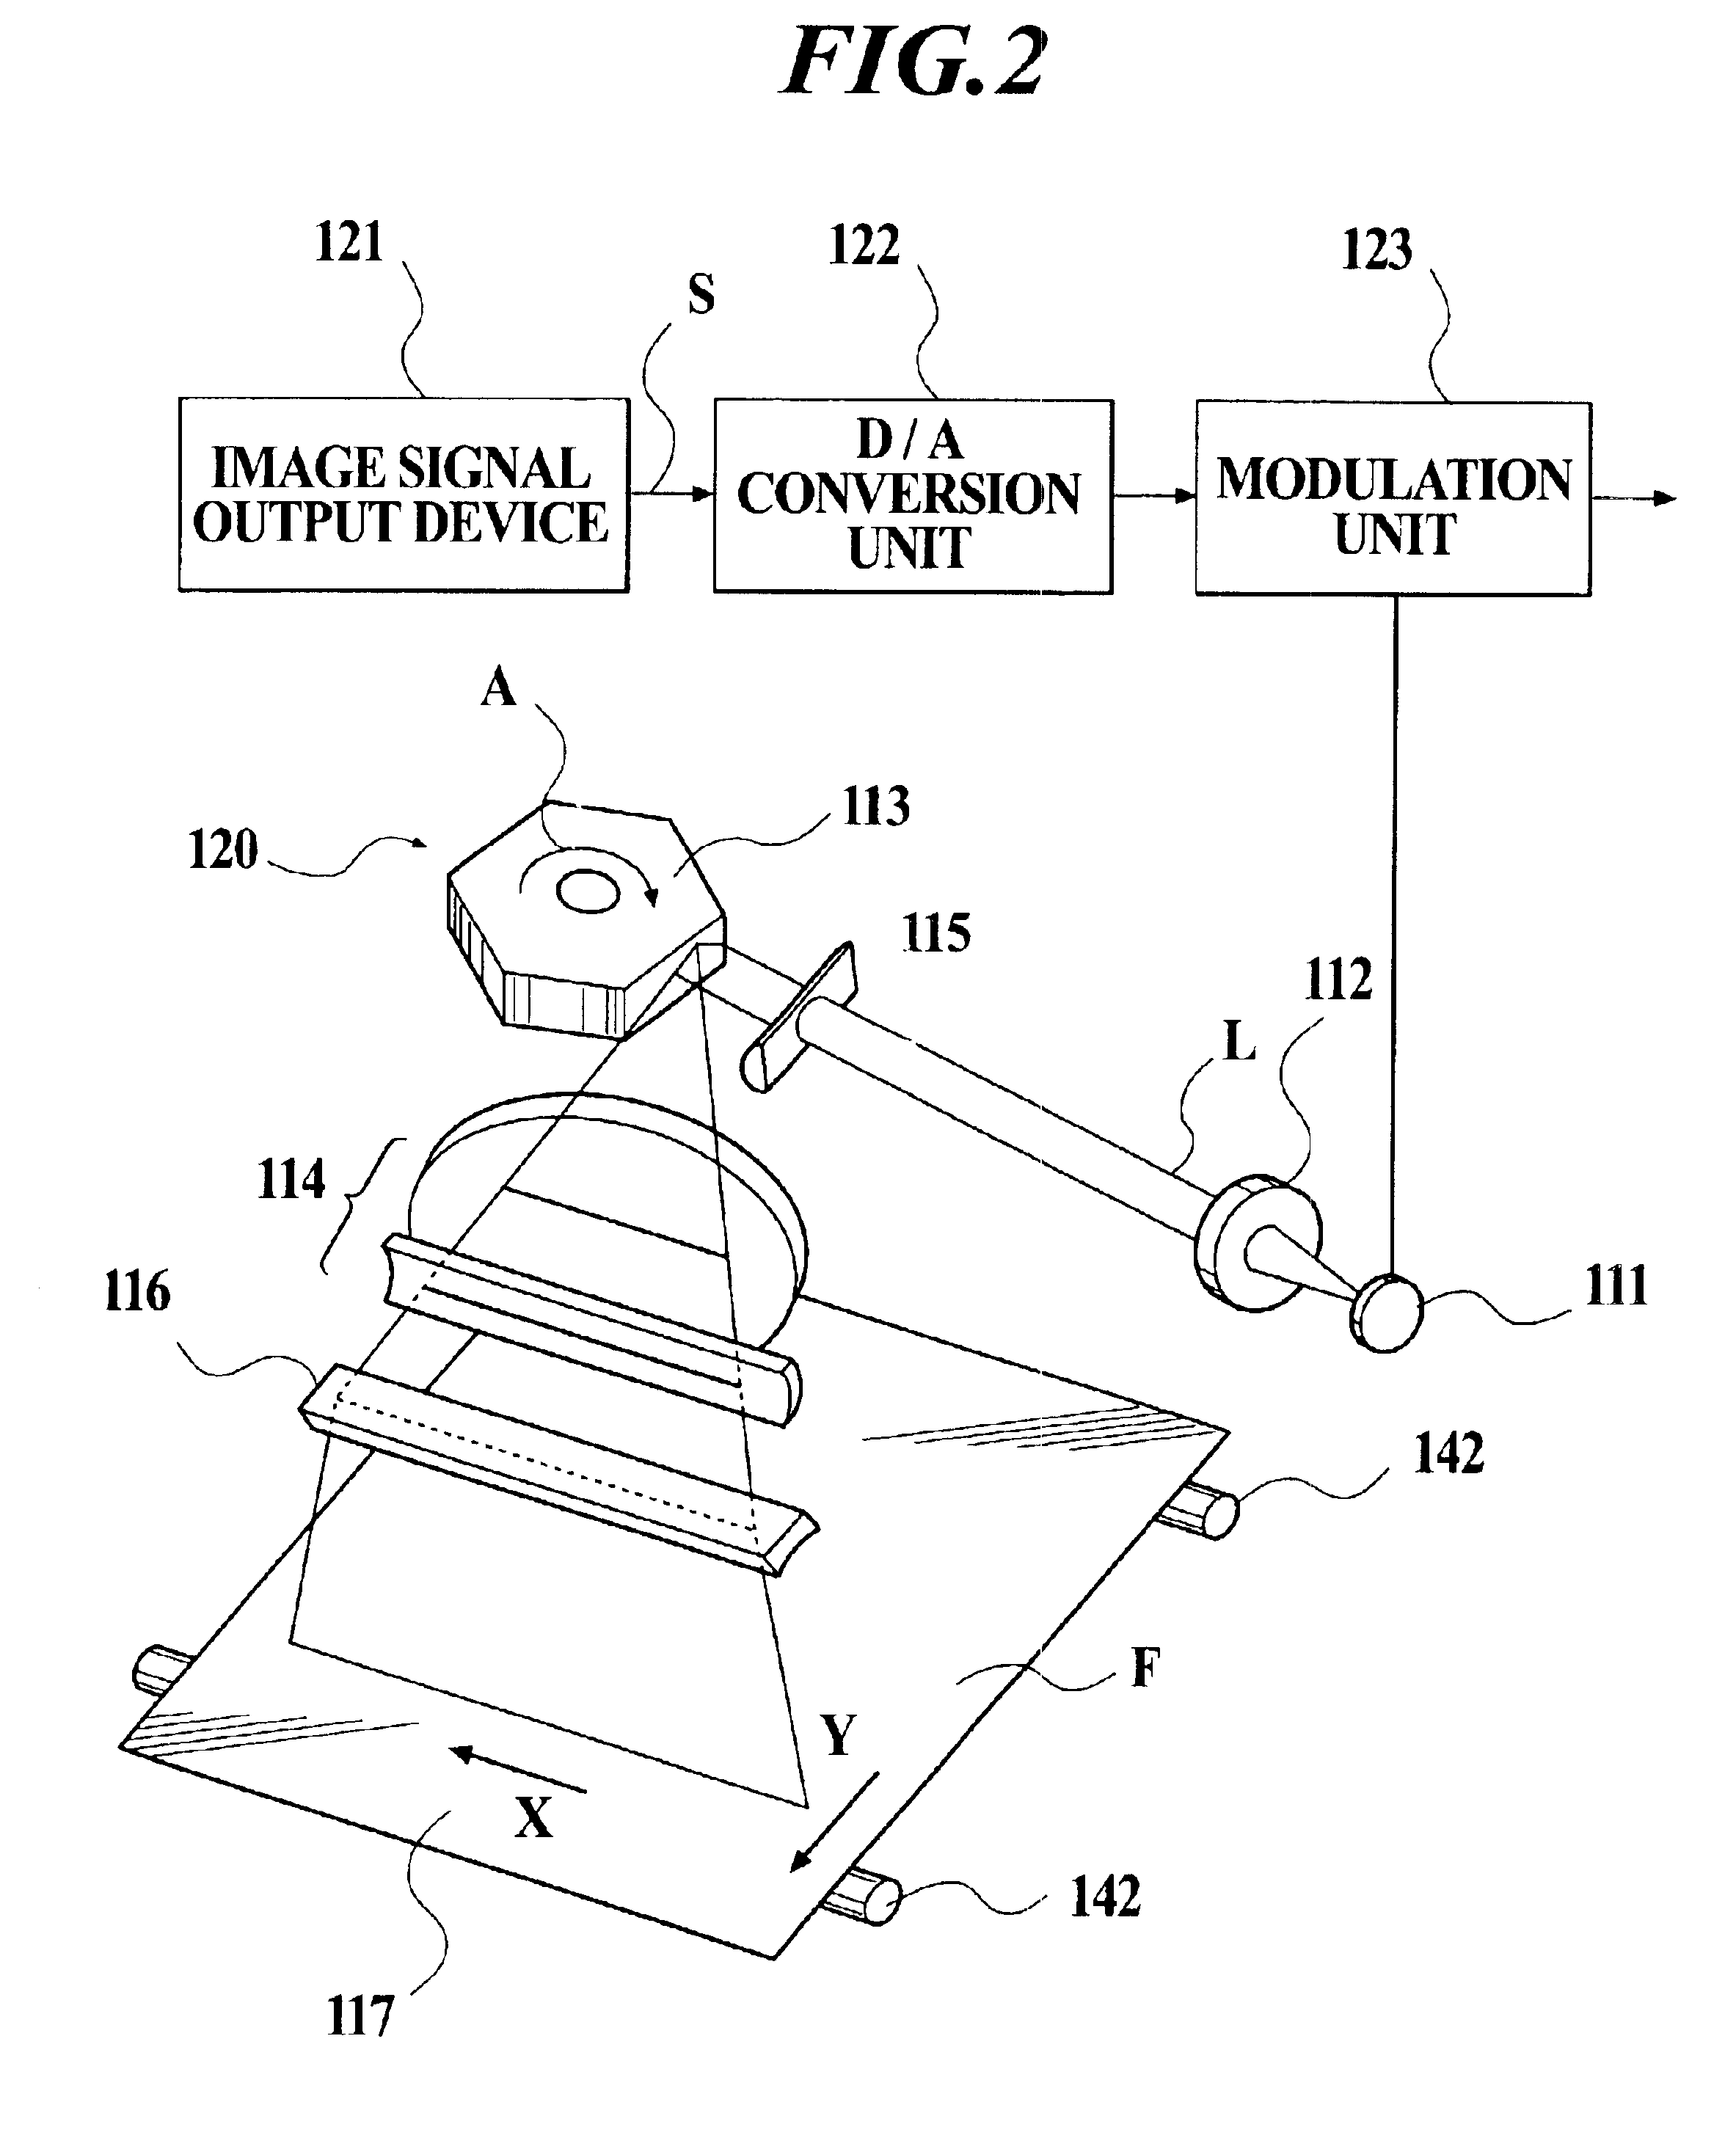 Image recording method and apparatus with density control